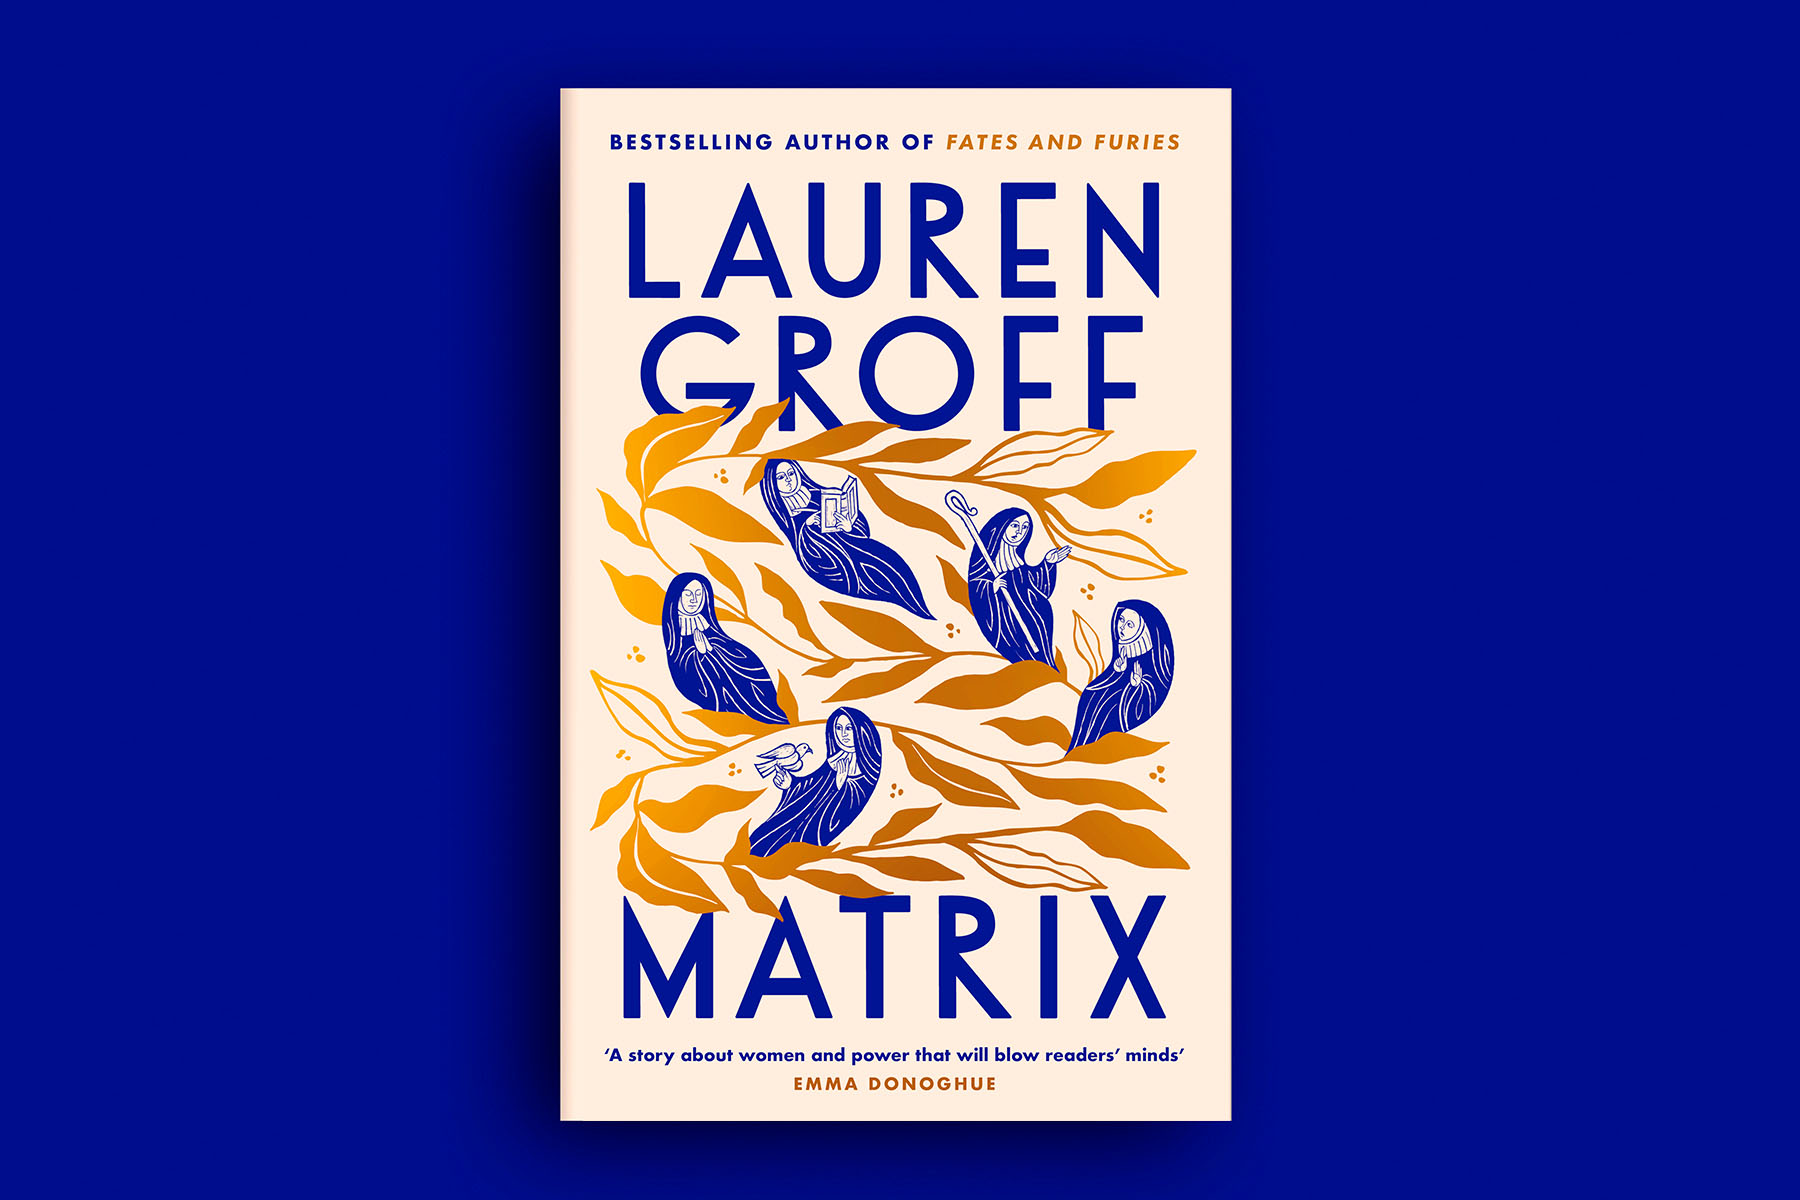 READ AN EXCLUSIVE EXTRACT OF MATRIX, THE VISIONARY NEW NOVEL FROM THE  AUTHOR OF FATES AND FURIES, LAUREN GROFF